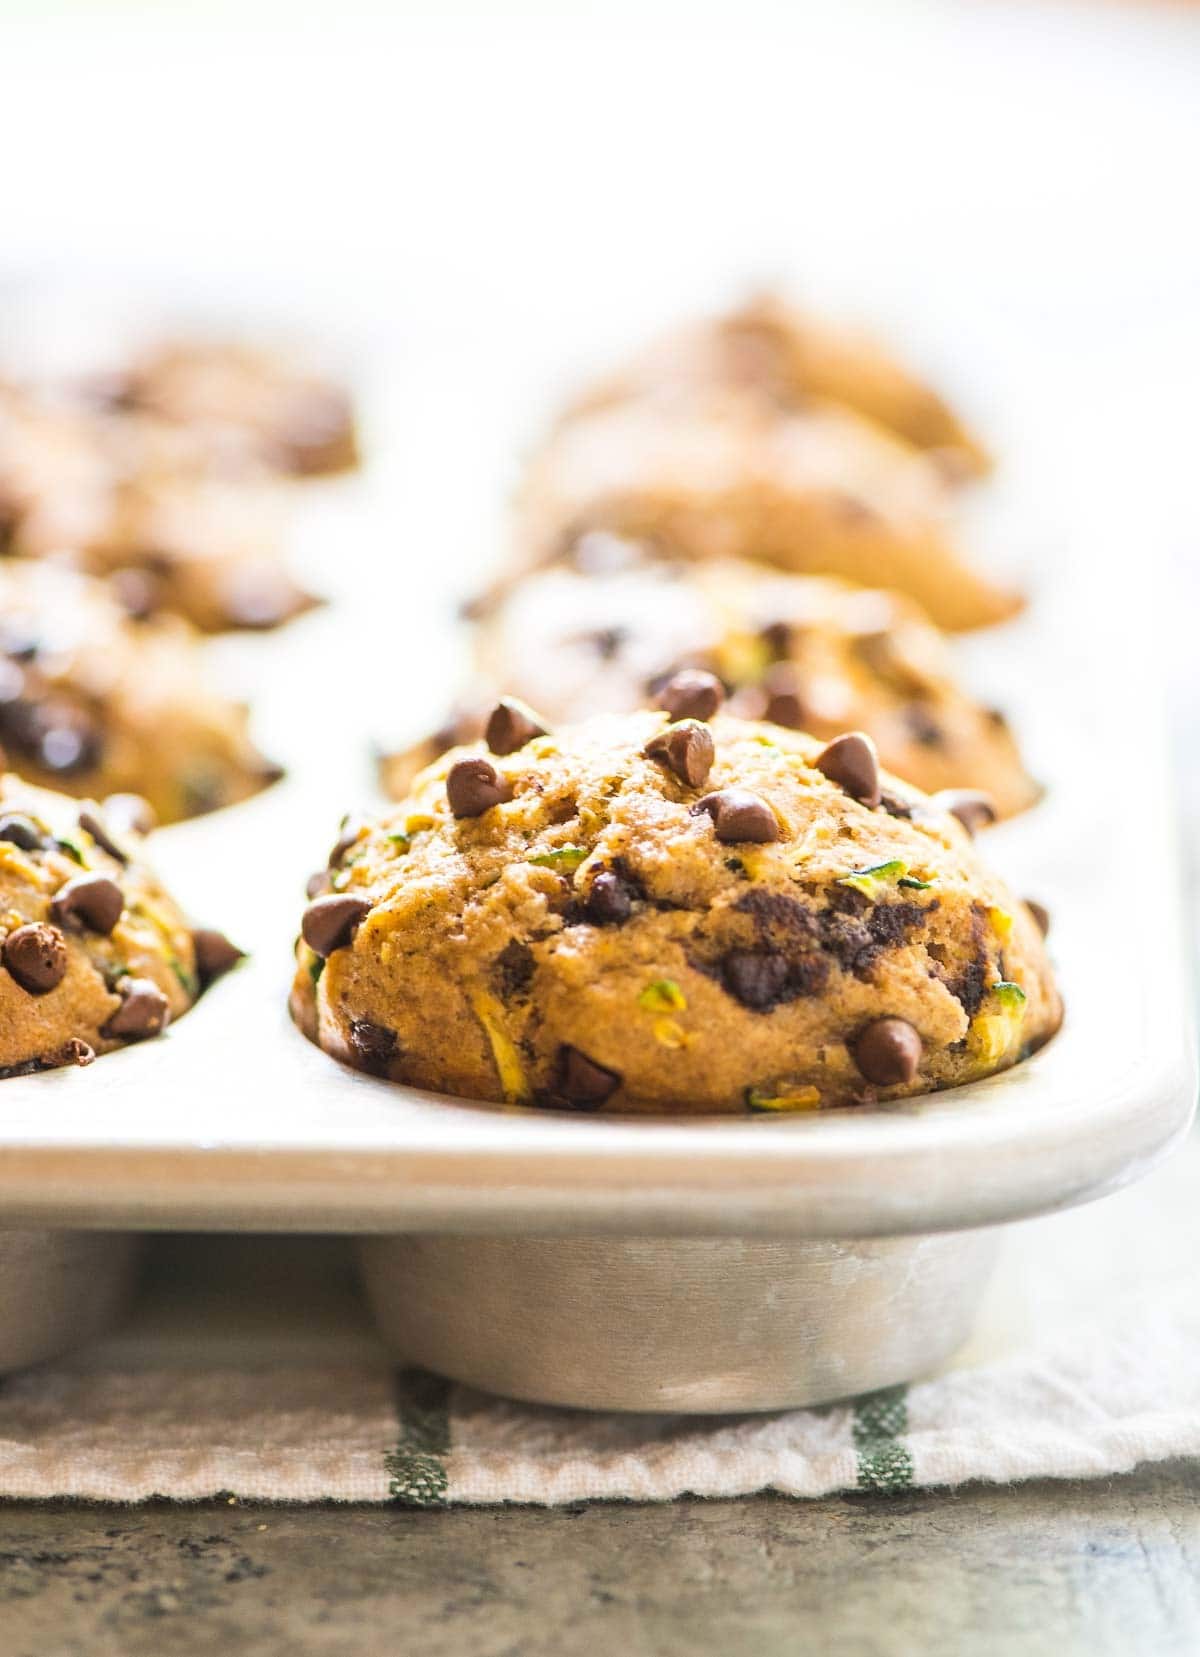 Back to School Lunch Ideas - Healthy Zucchini Muffins with Chocolate Chips - Quick Snacks, Lunches and Homemade Lunchables - Bento Box Style Lunch for People in A Hurry - Fast Lunch Recipes to Pack Ahead - Healthy Ideas for Kids, Teens and Adults 